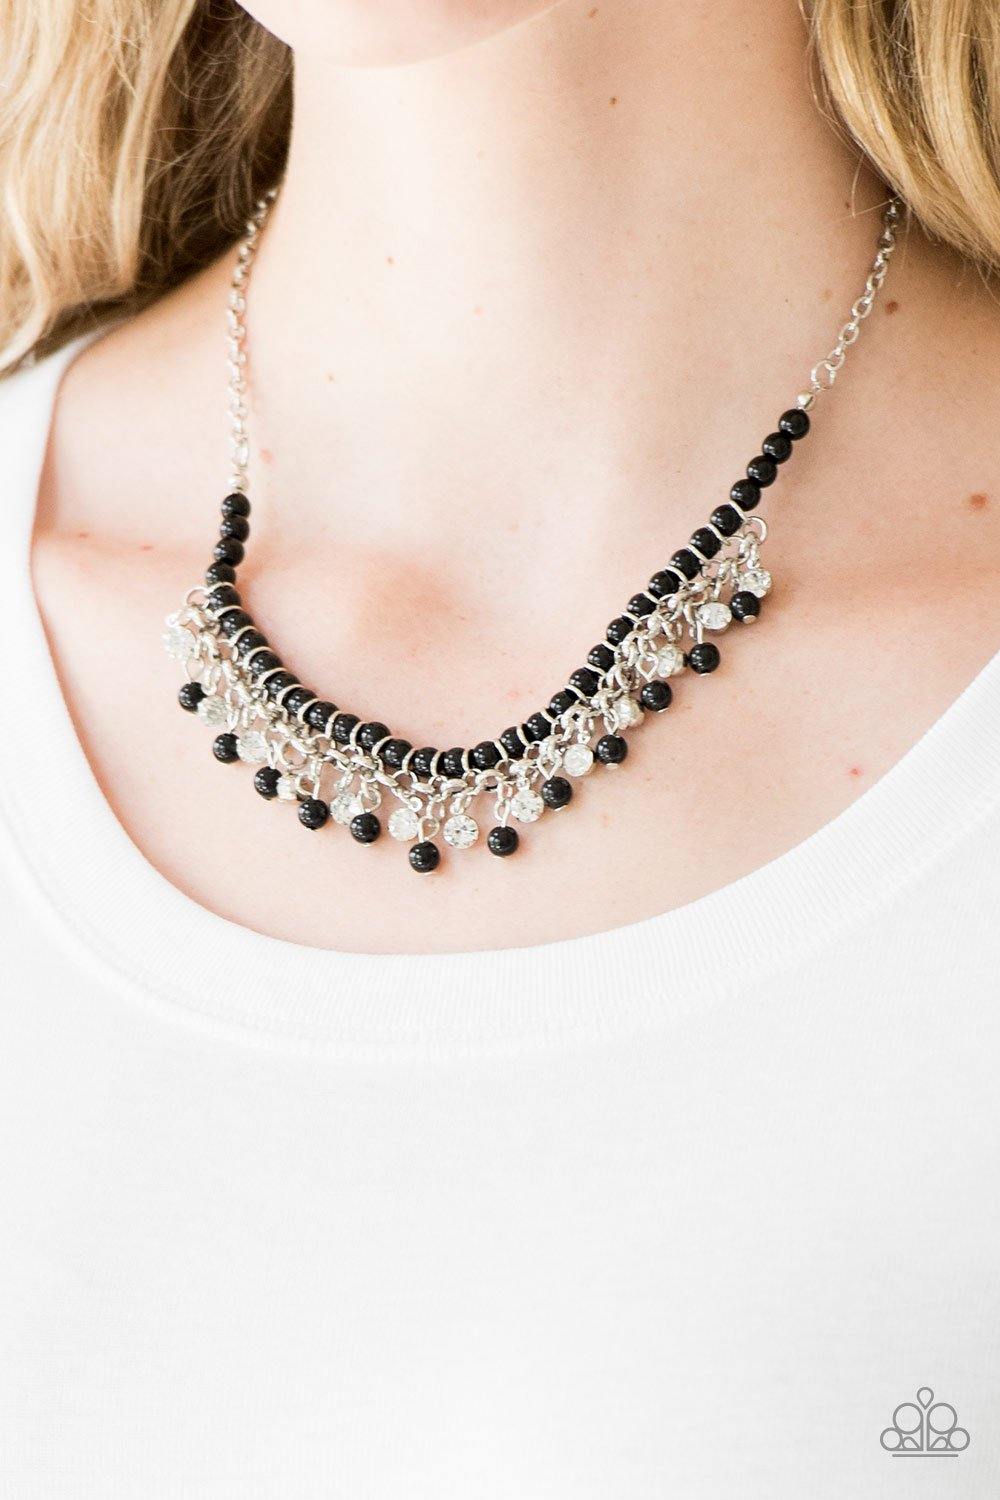 A Touch of CLASSY Black
Necklace - Daria's Blings N Things